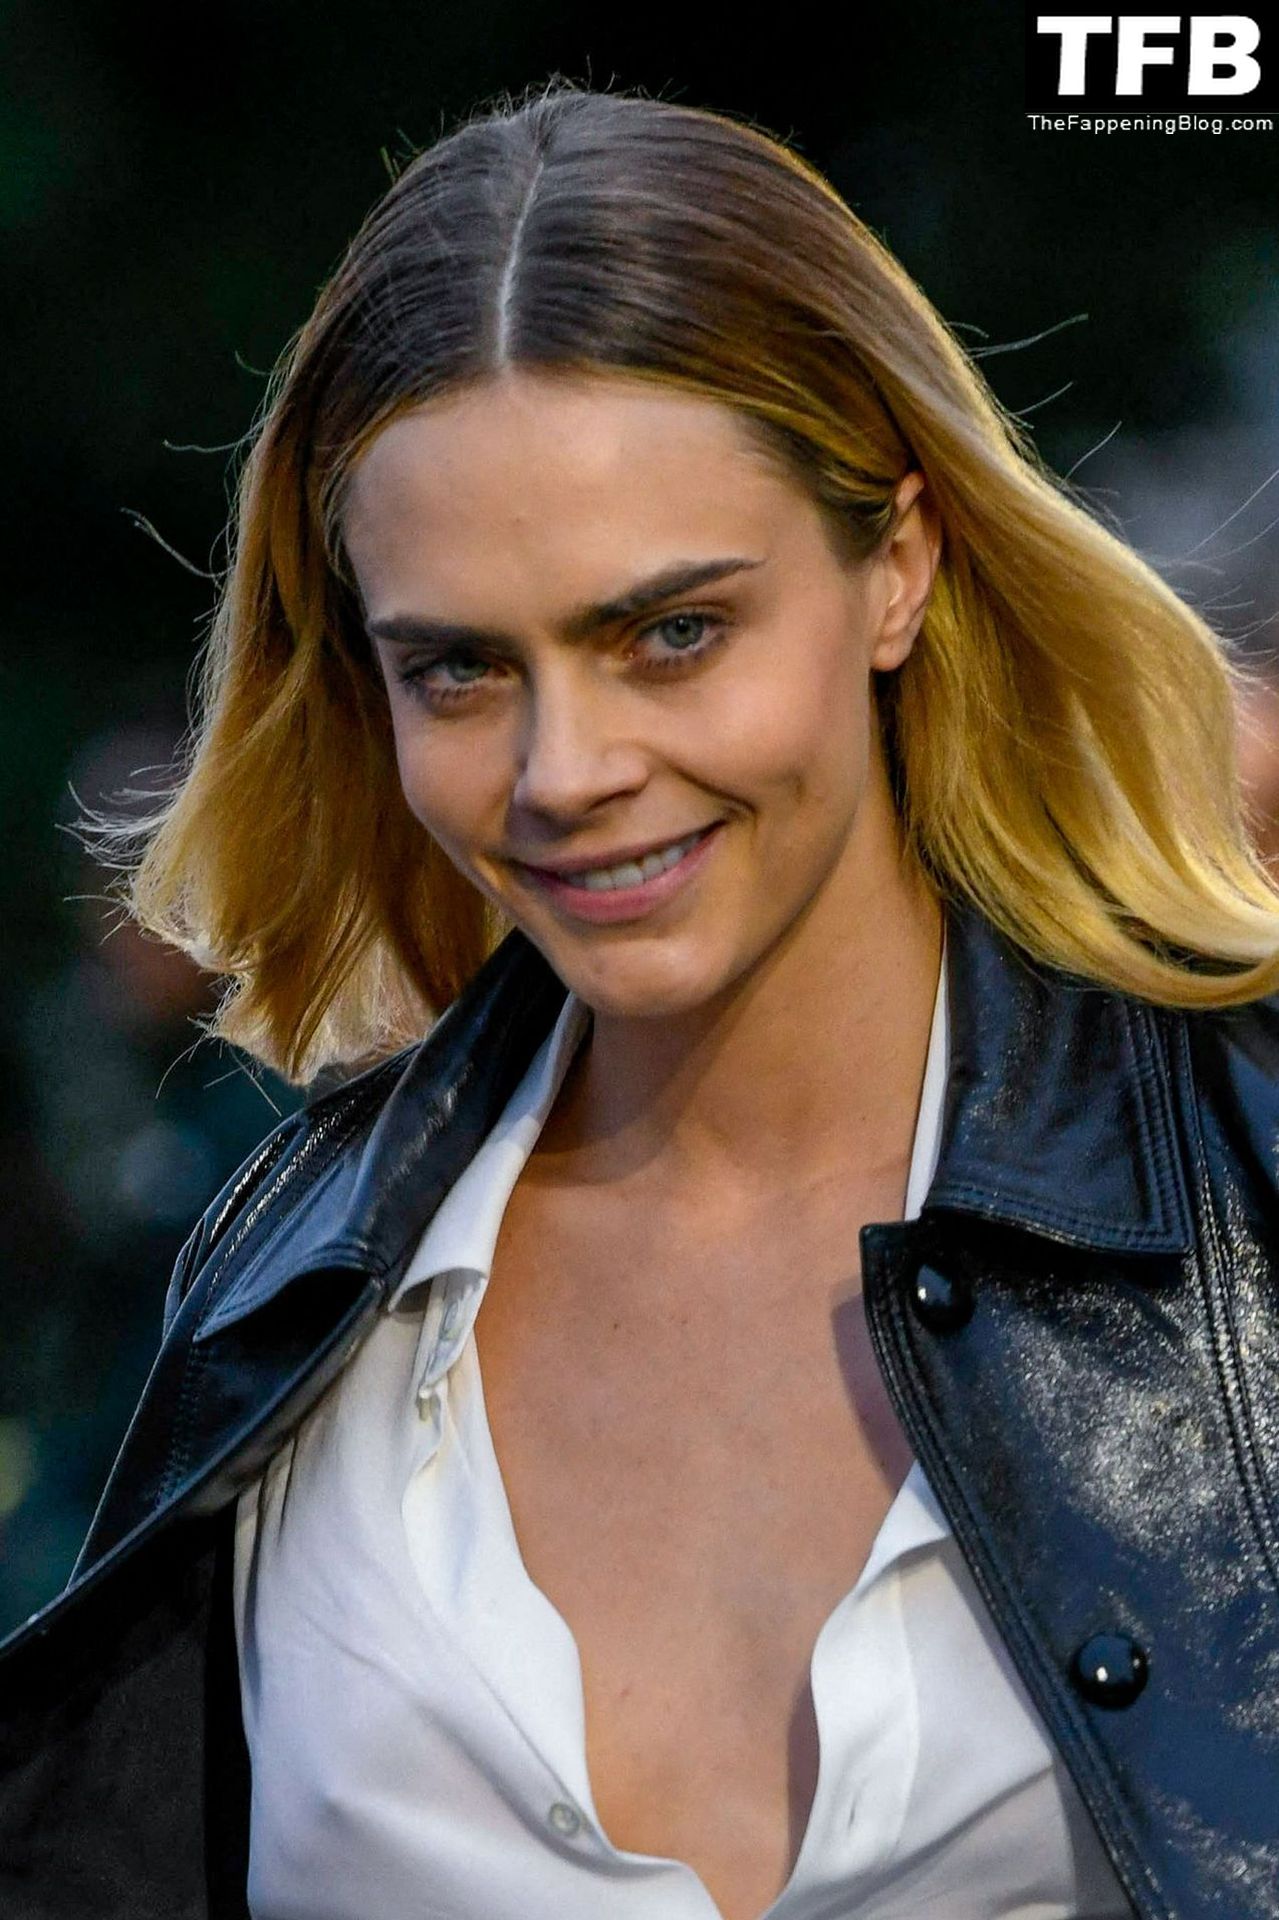 Cara-Delevingne-Sexy-The-Fappening-Blog-16.jpg